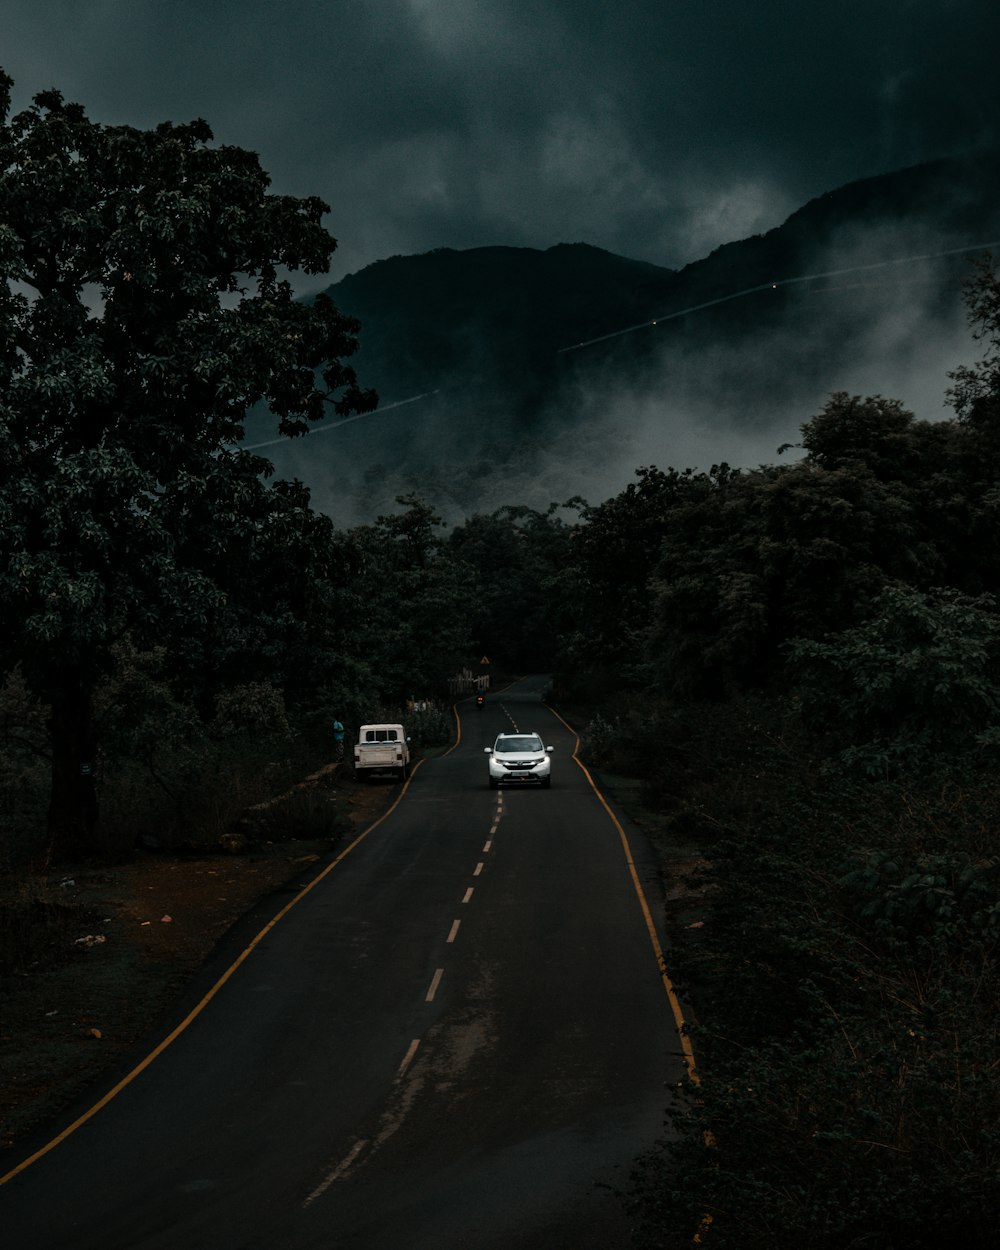 a couple of cars driving down a road under a cloudy sky